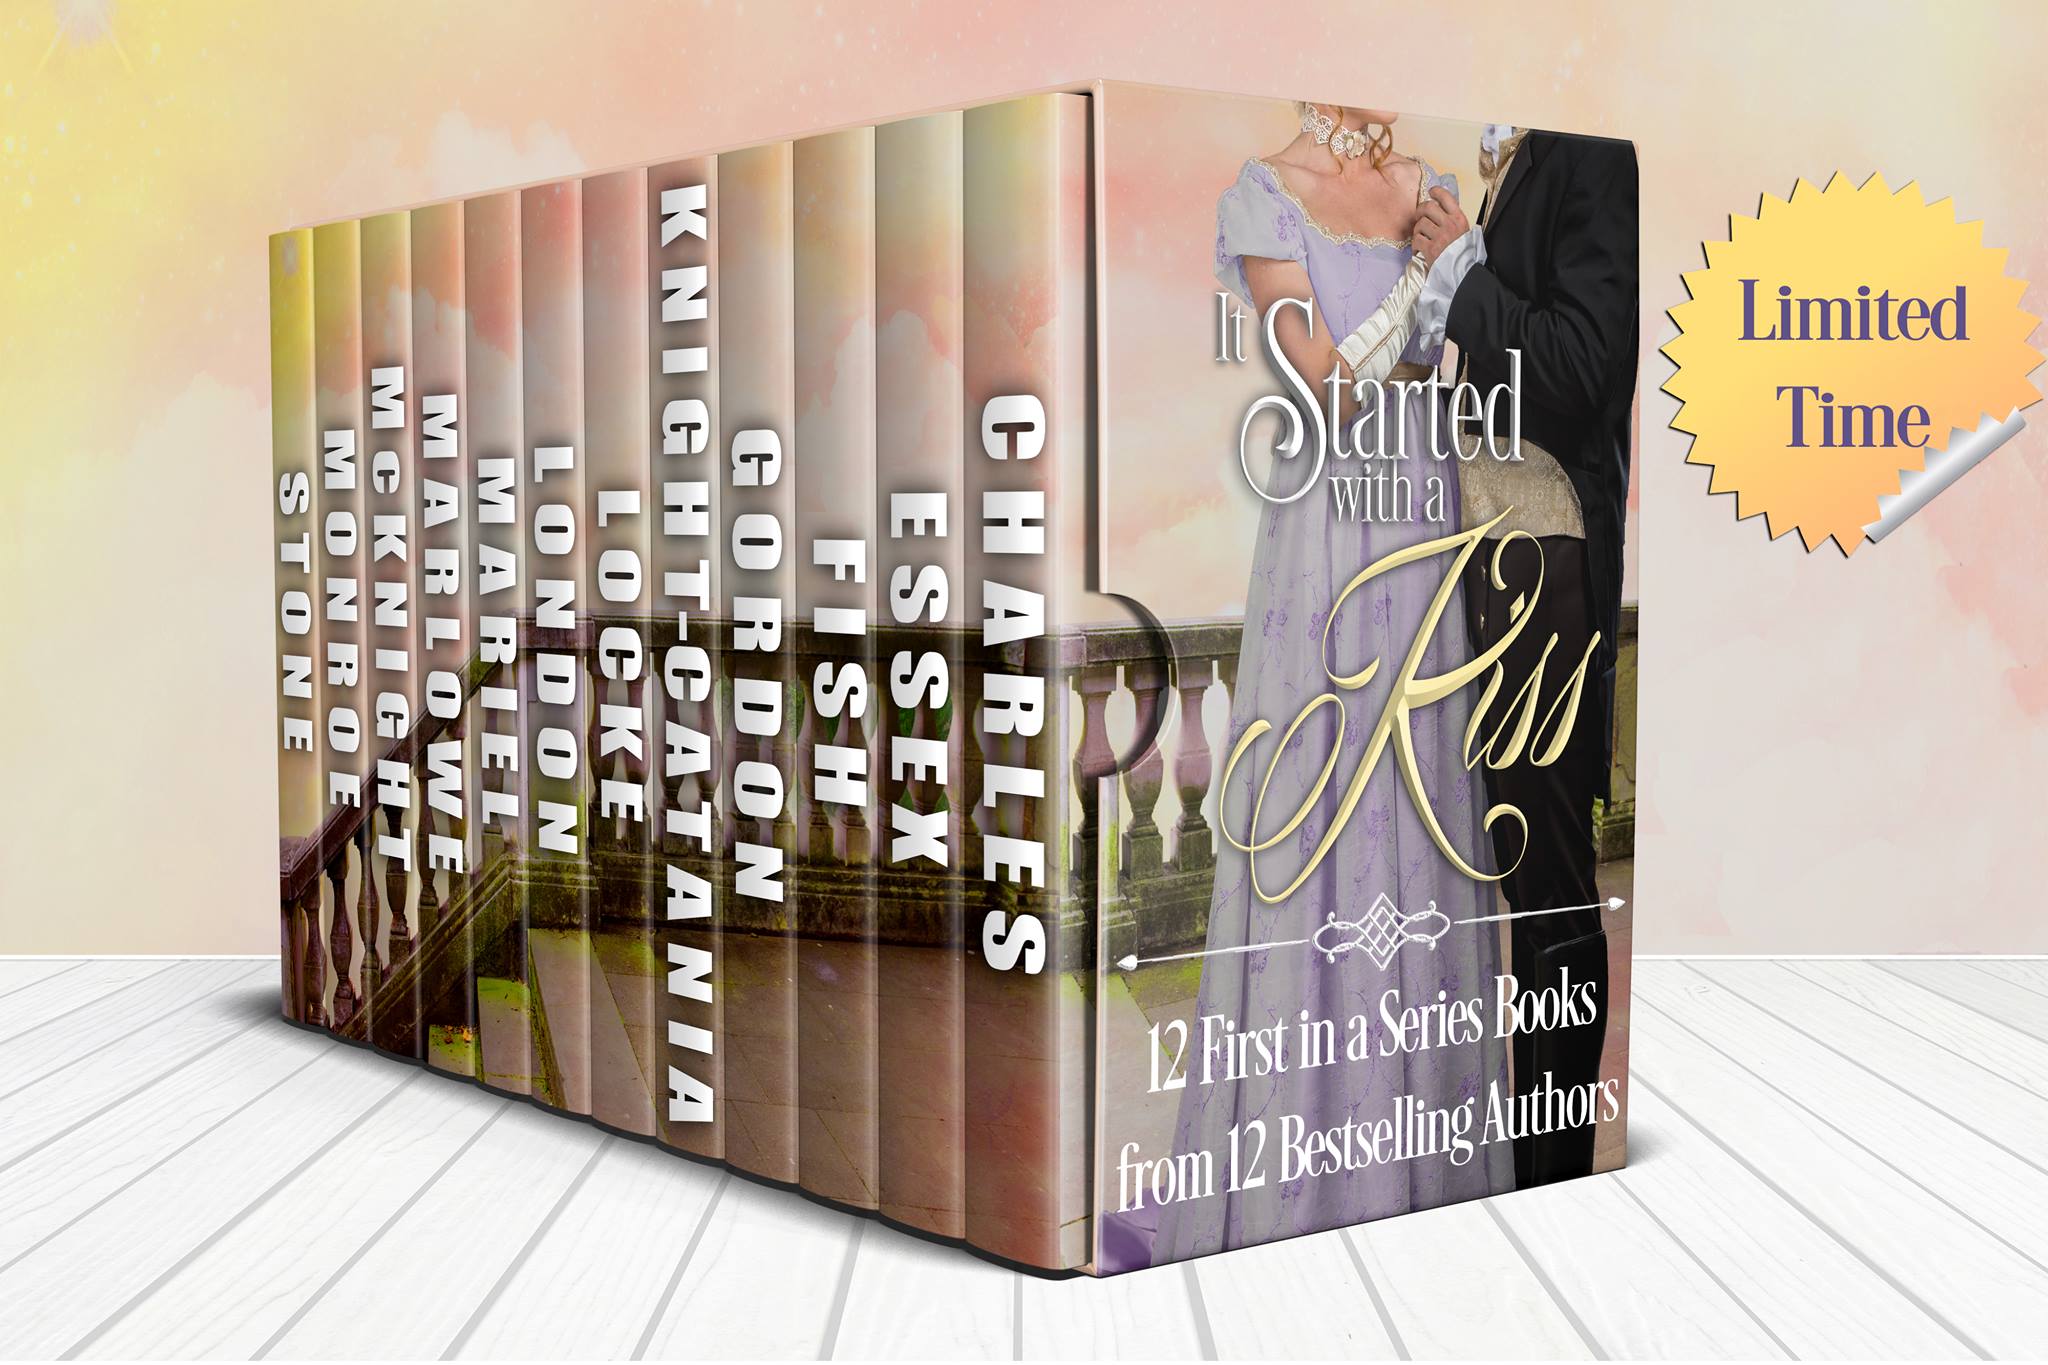 IT STARTED WITH A KISS – Limited Time Box Set!